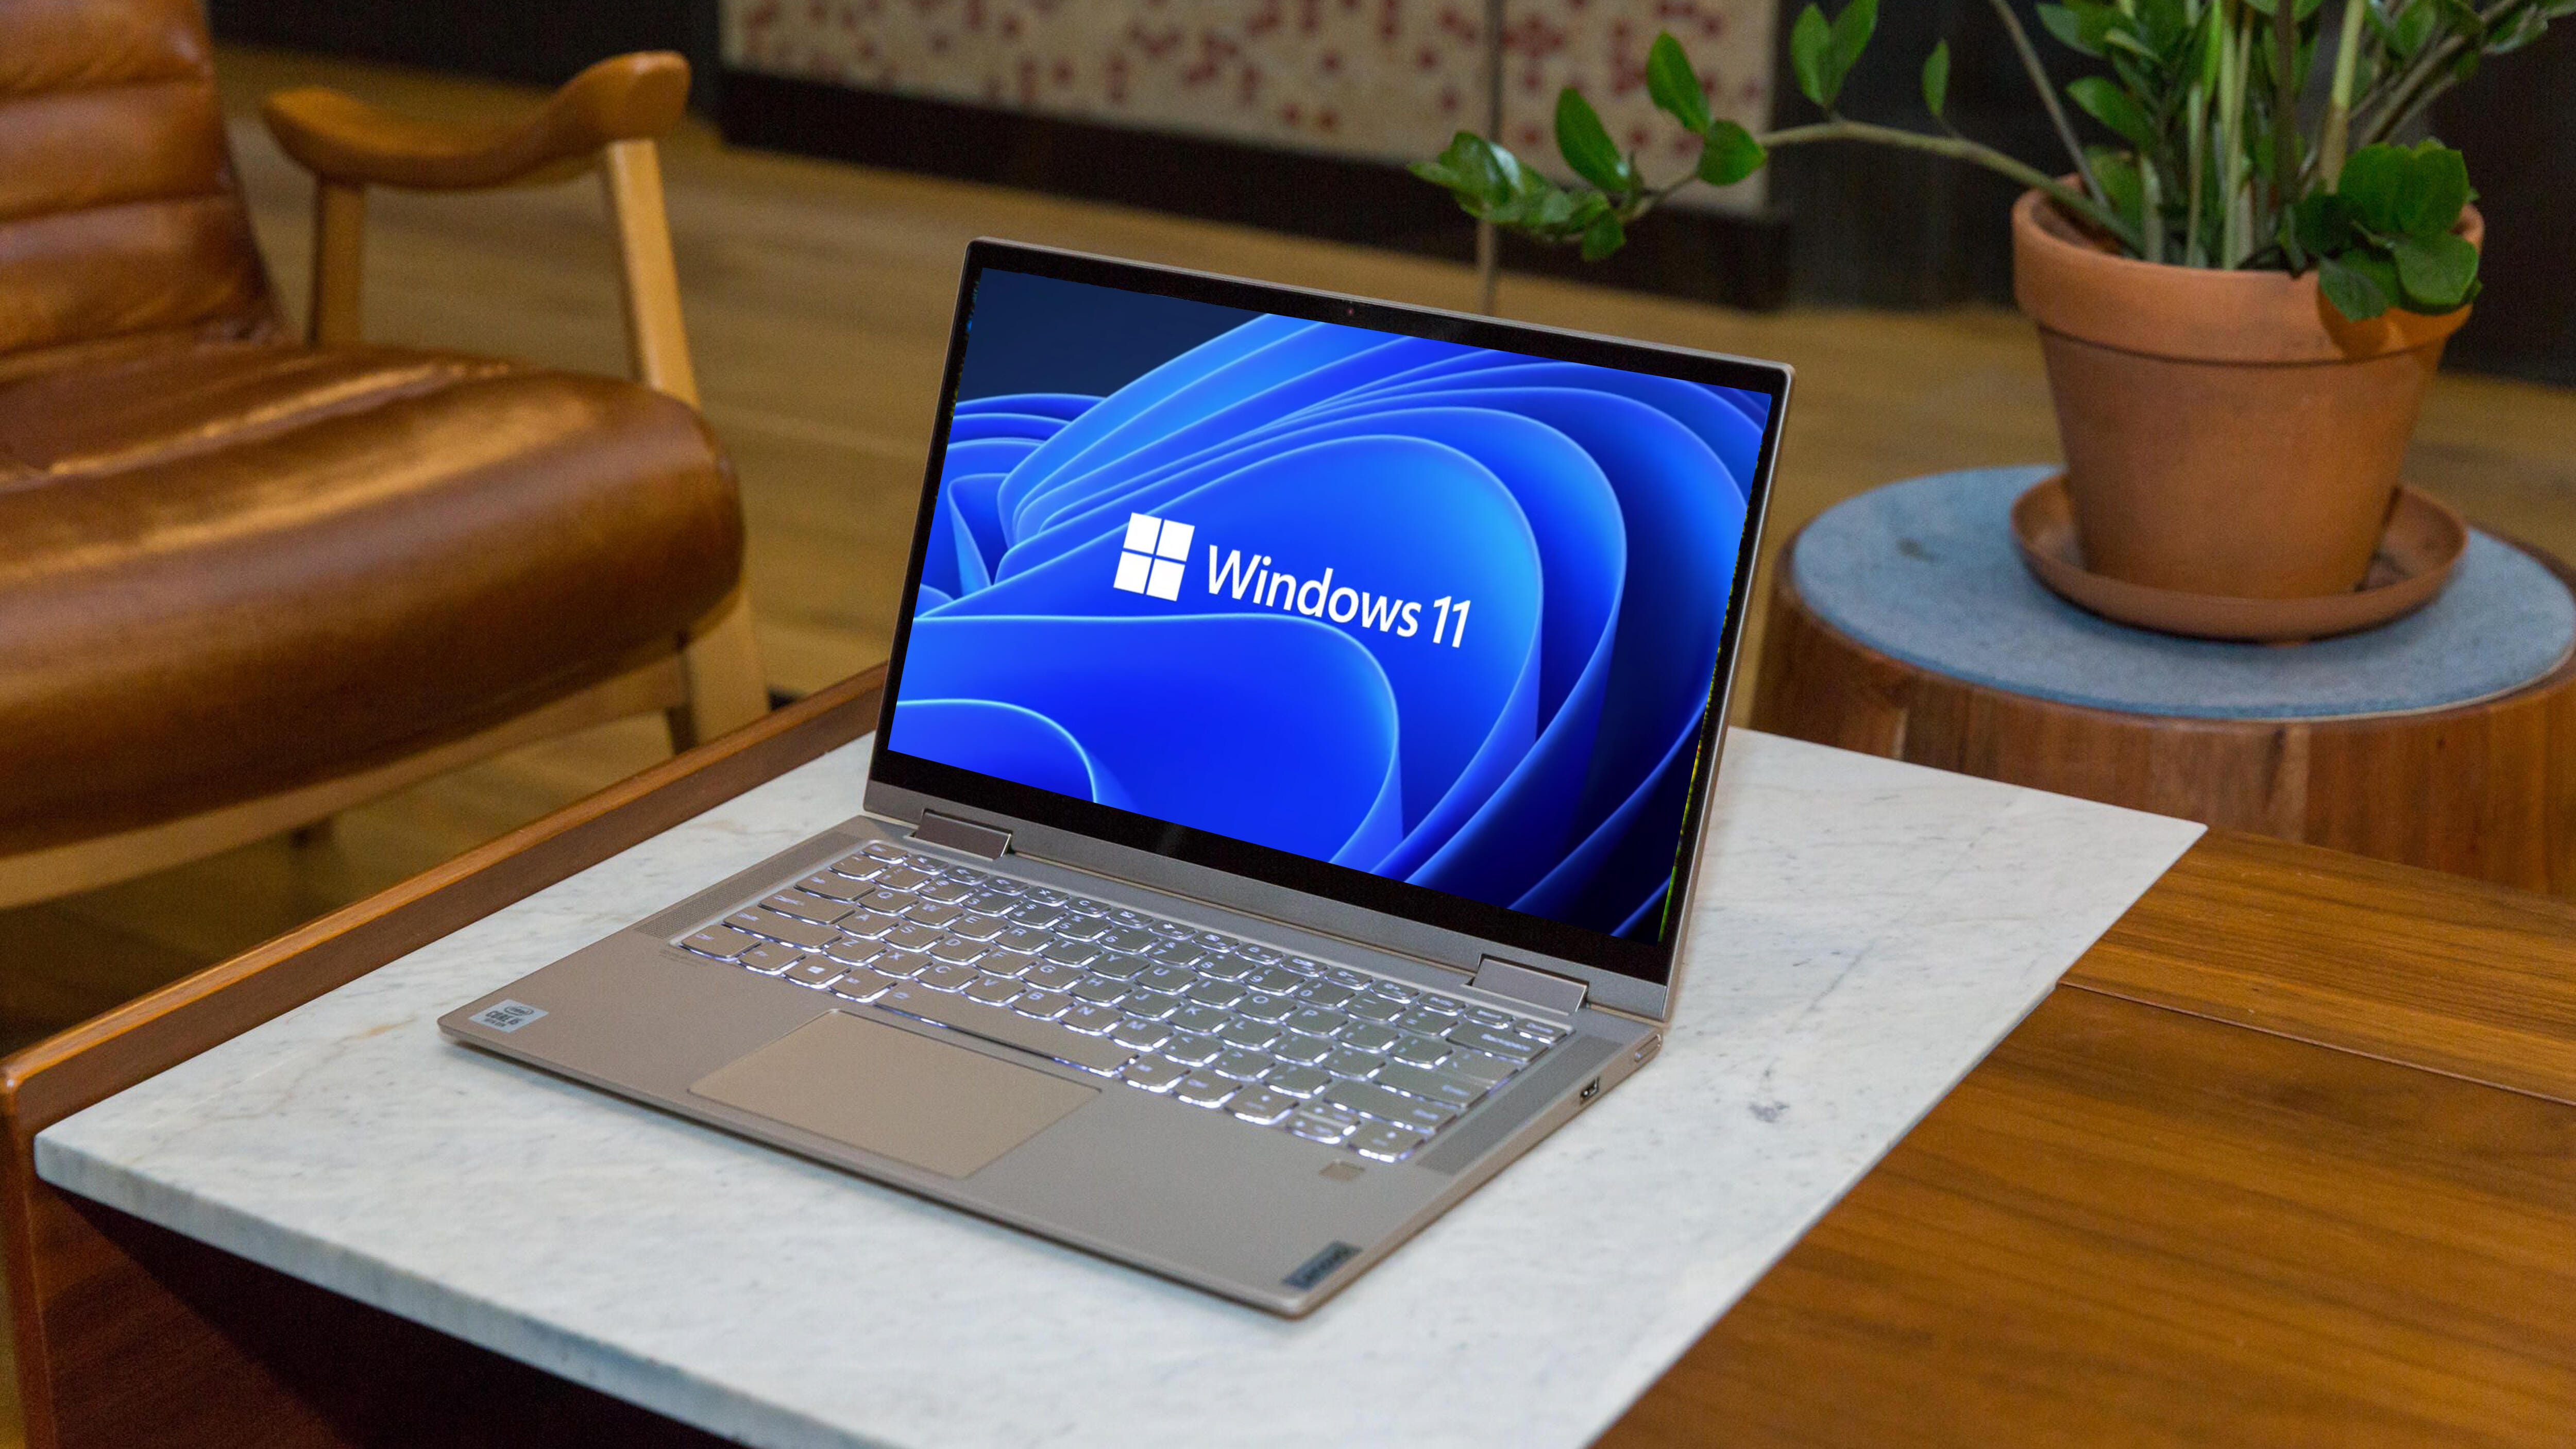 Windows 11: Do I really have to upgrade from Windows 10? What to know